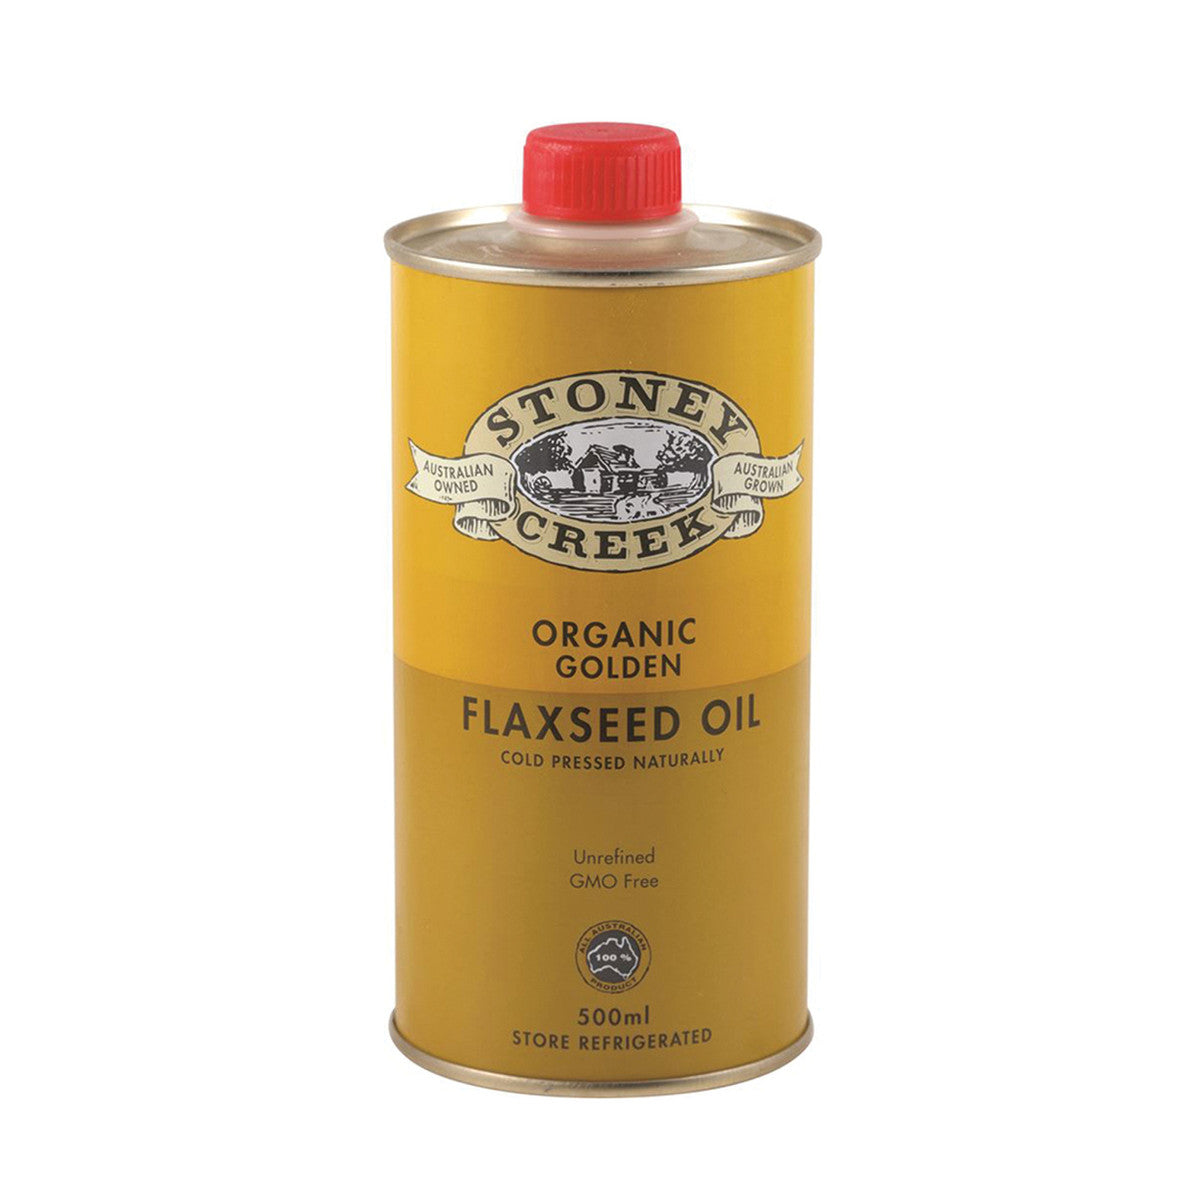 Stoney Creek Golden Flaxseed Oil 250mL Or 500mL, Cold Pressed & Certified Organic